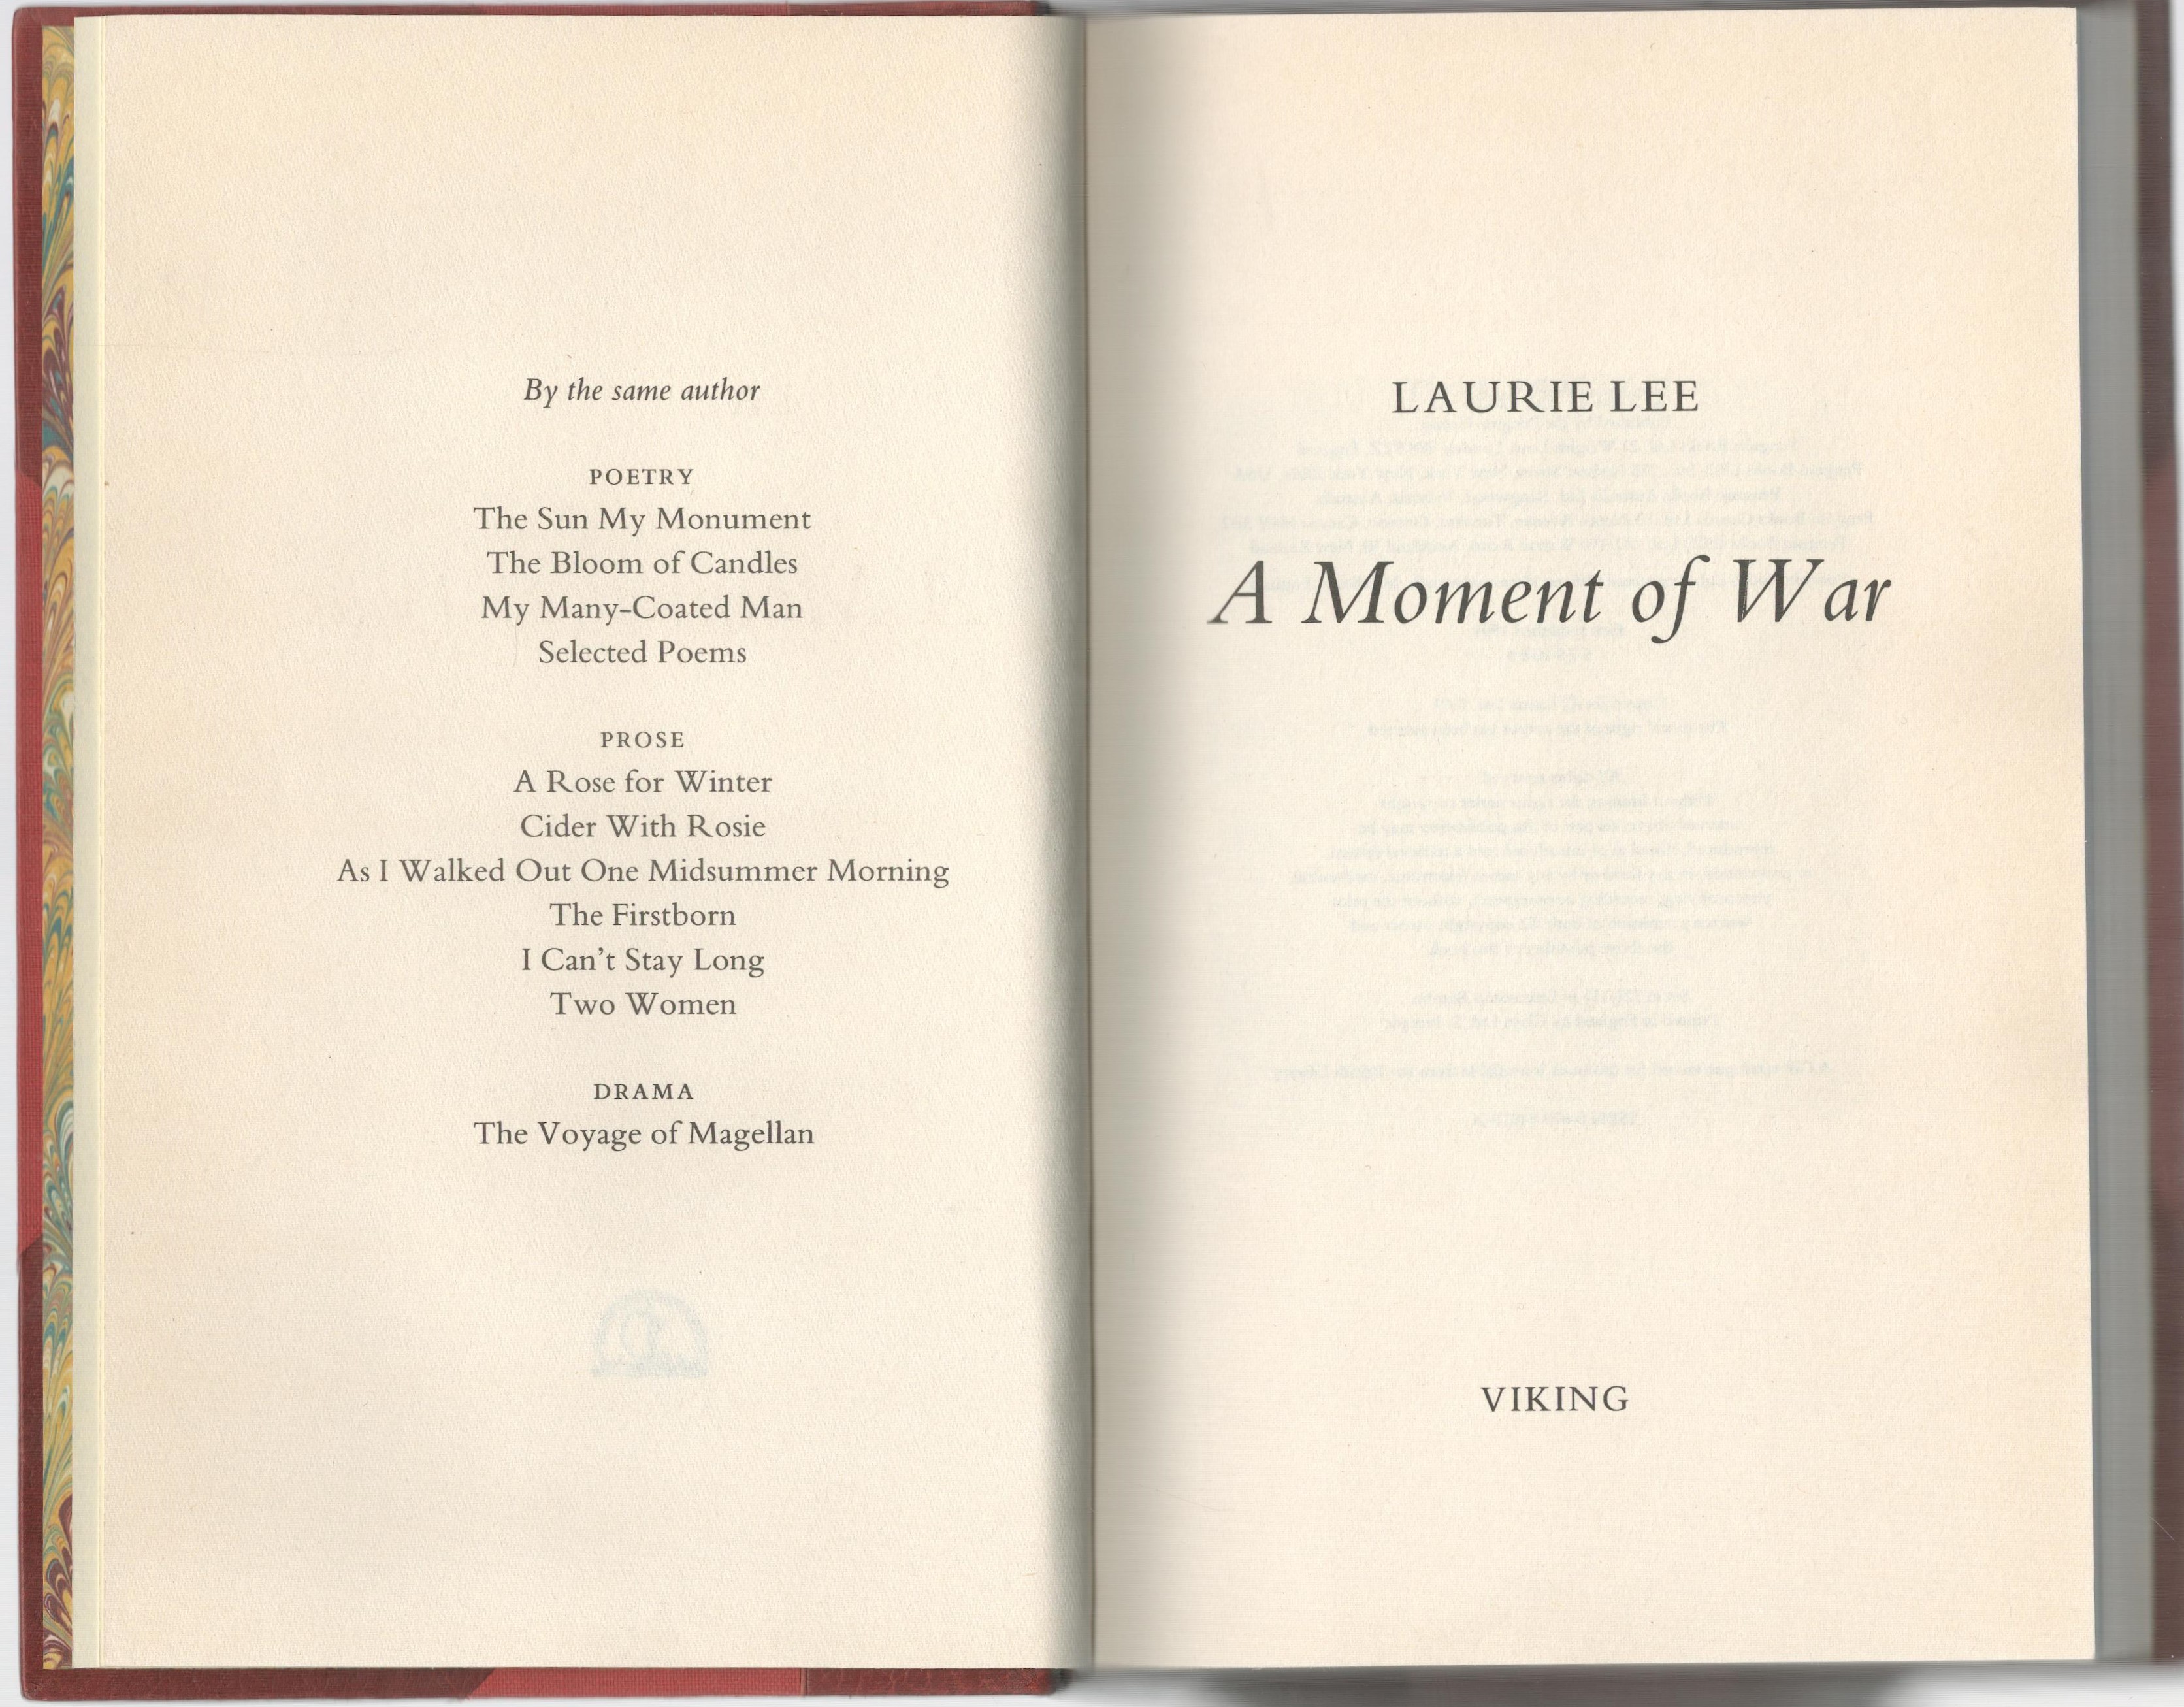 A Moment of War Hardback Book by Laurie Lee. Published in 1991. 178 Pages. Red Partial Cloth - Image 2 of 3